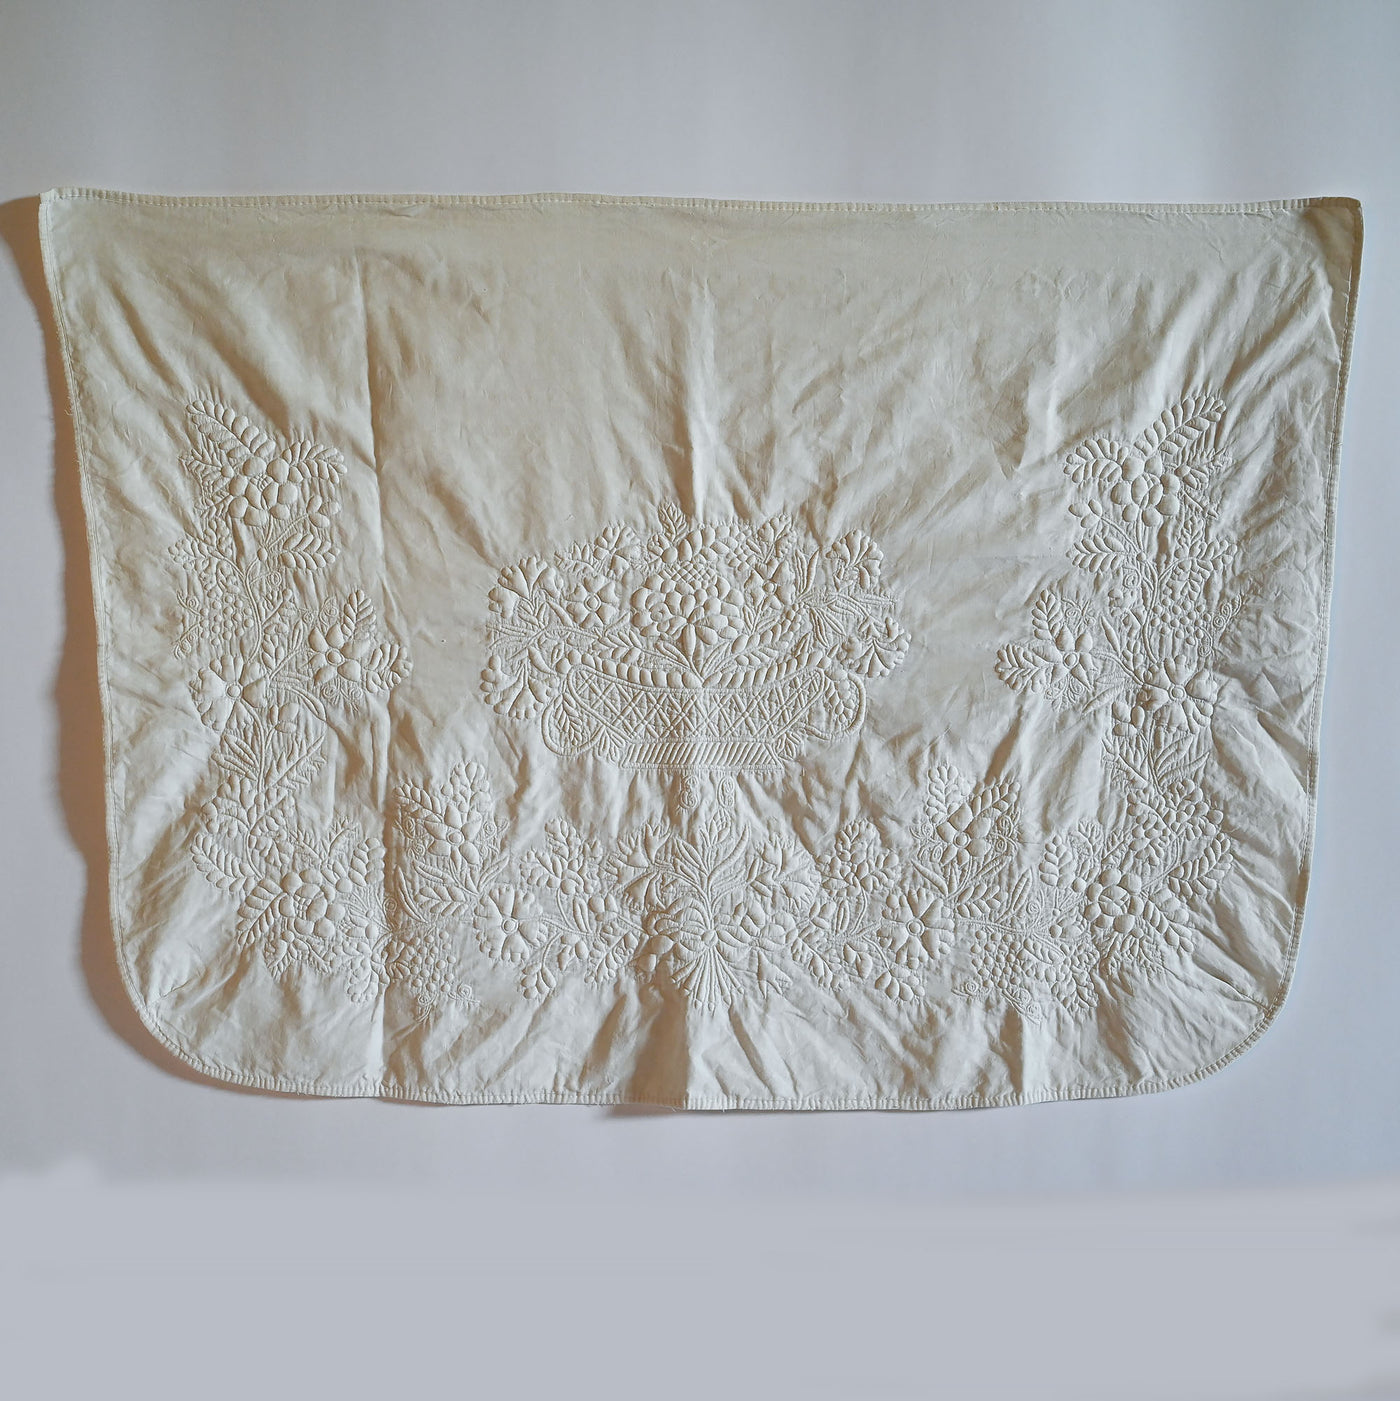 Large white antique trapunto dresser scarf from the 1800's.